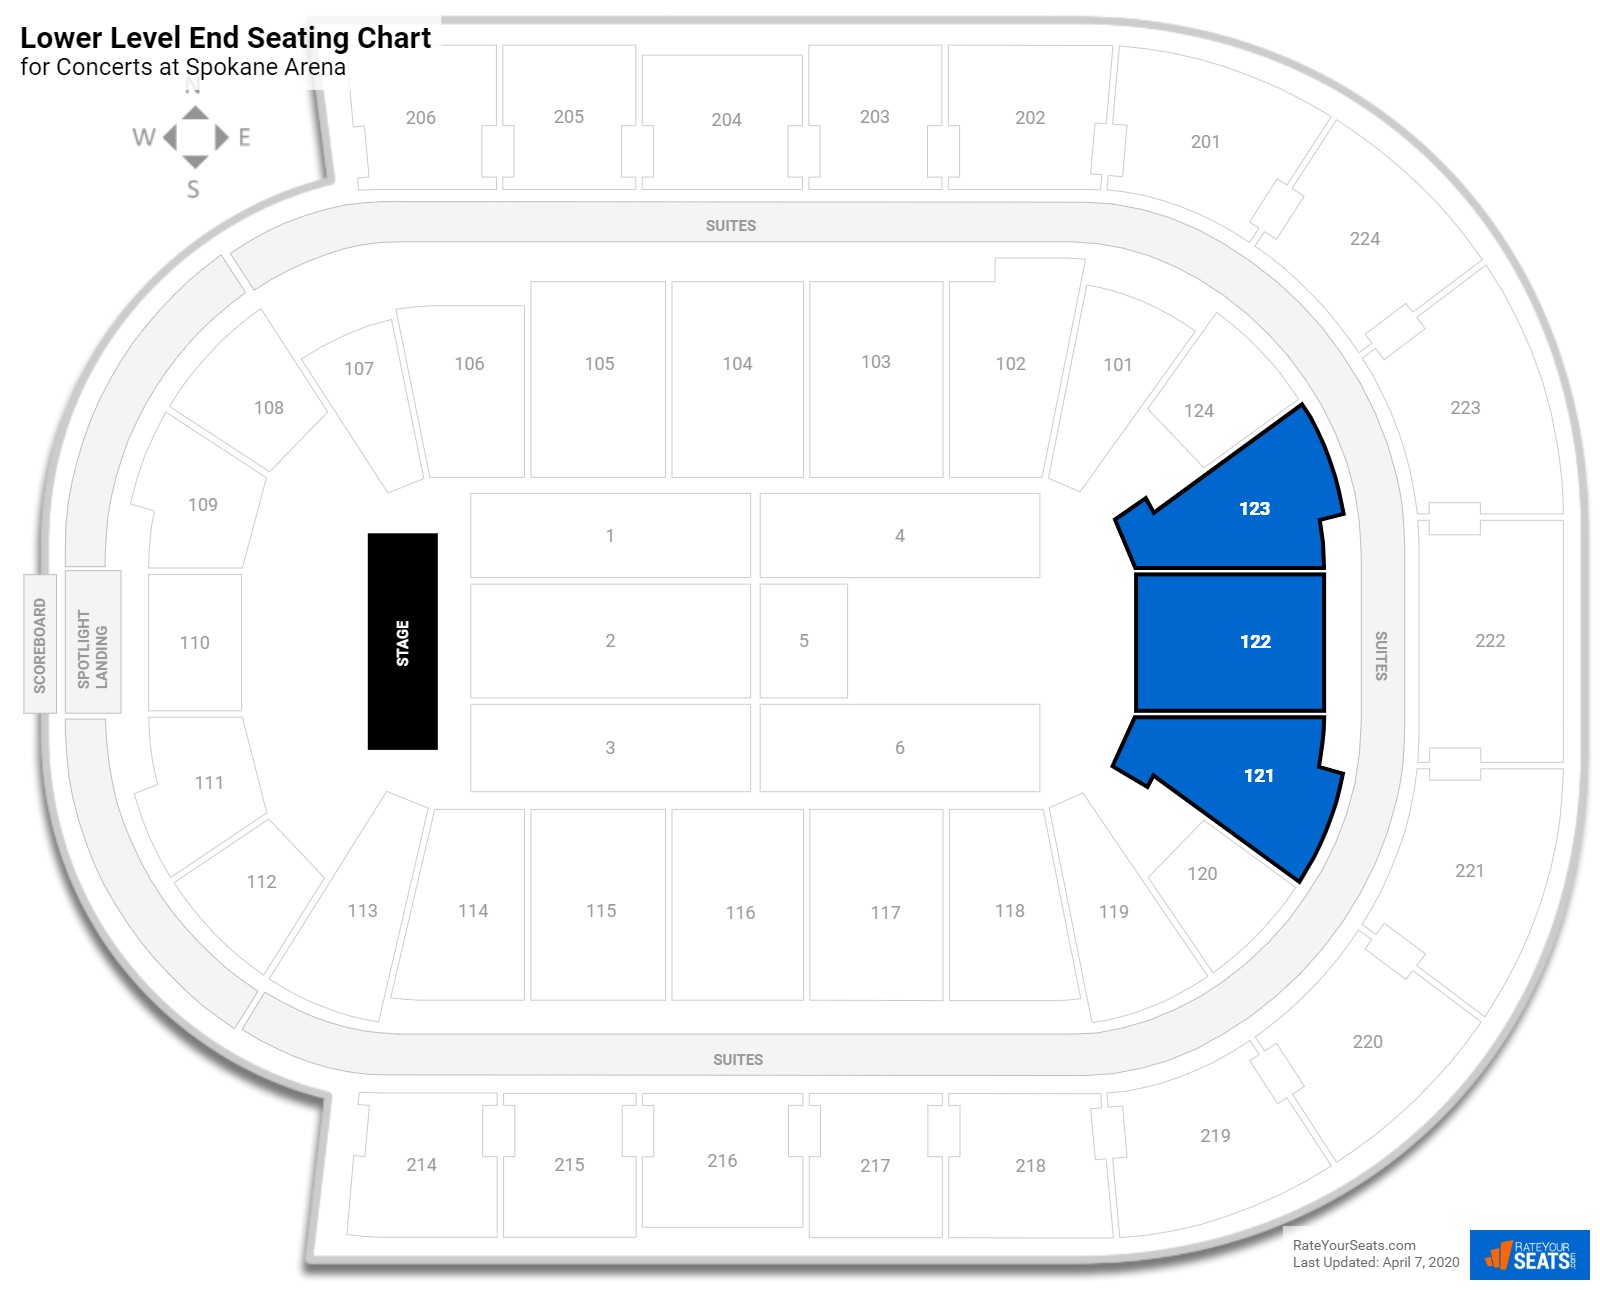 Spokane Arena Seating for Concerts